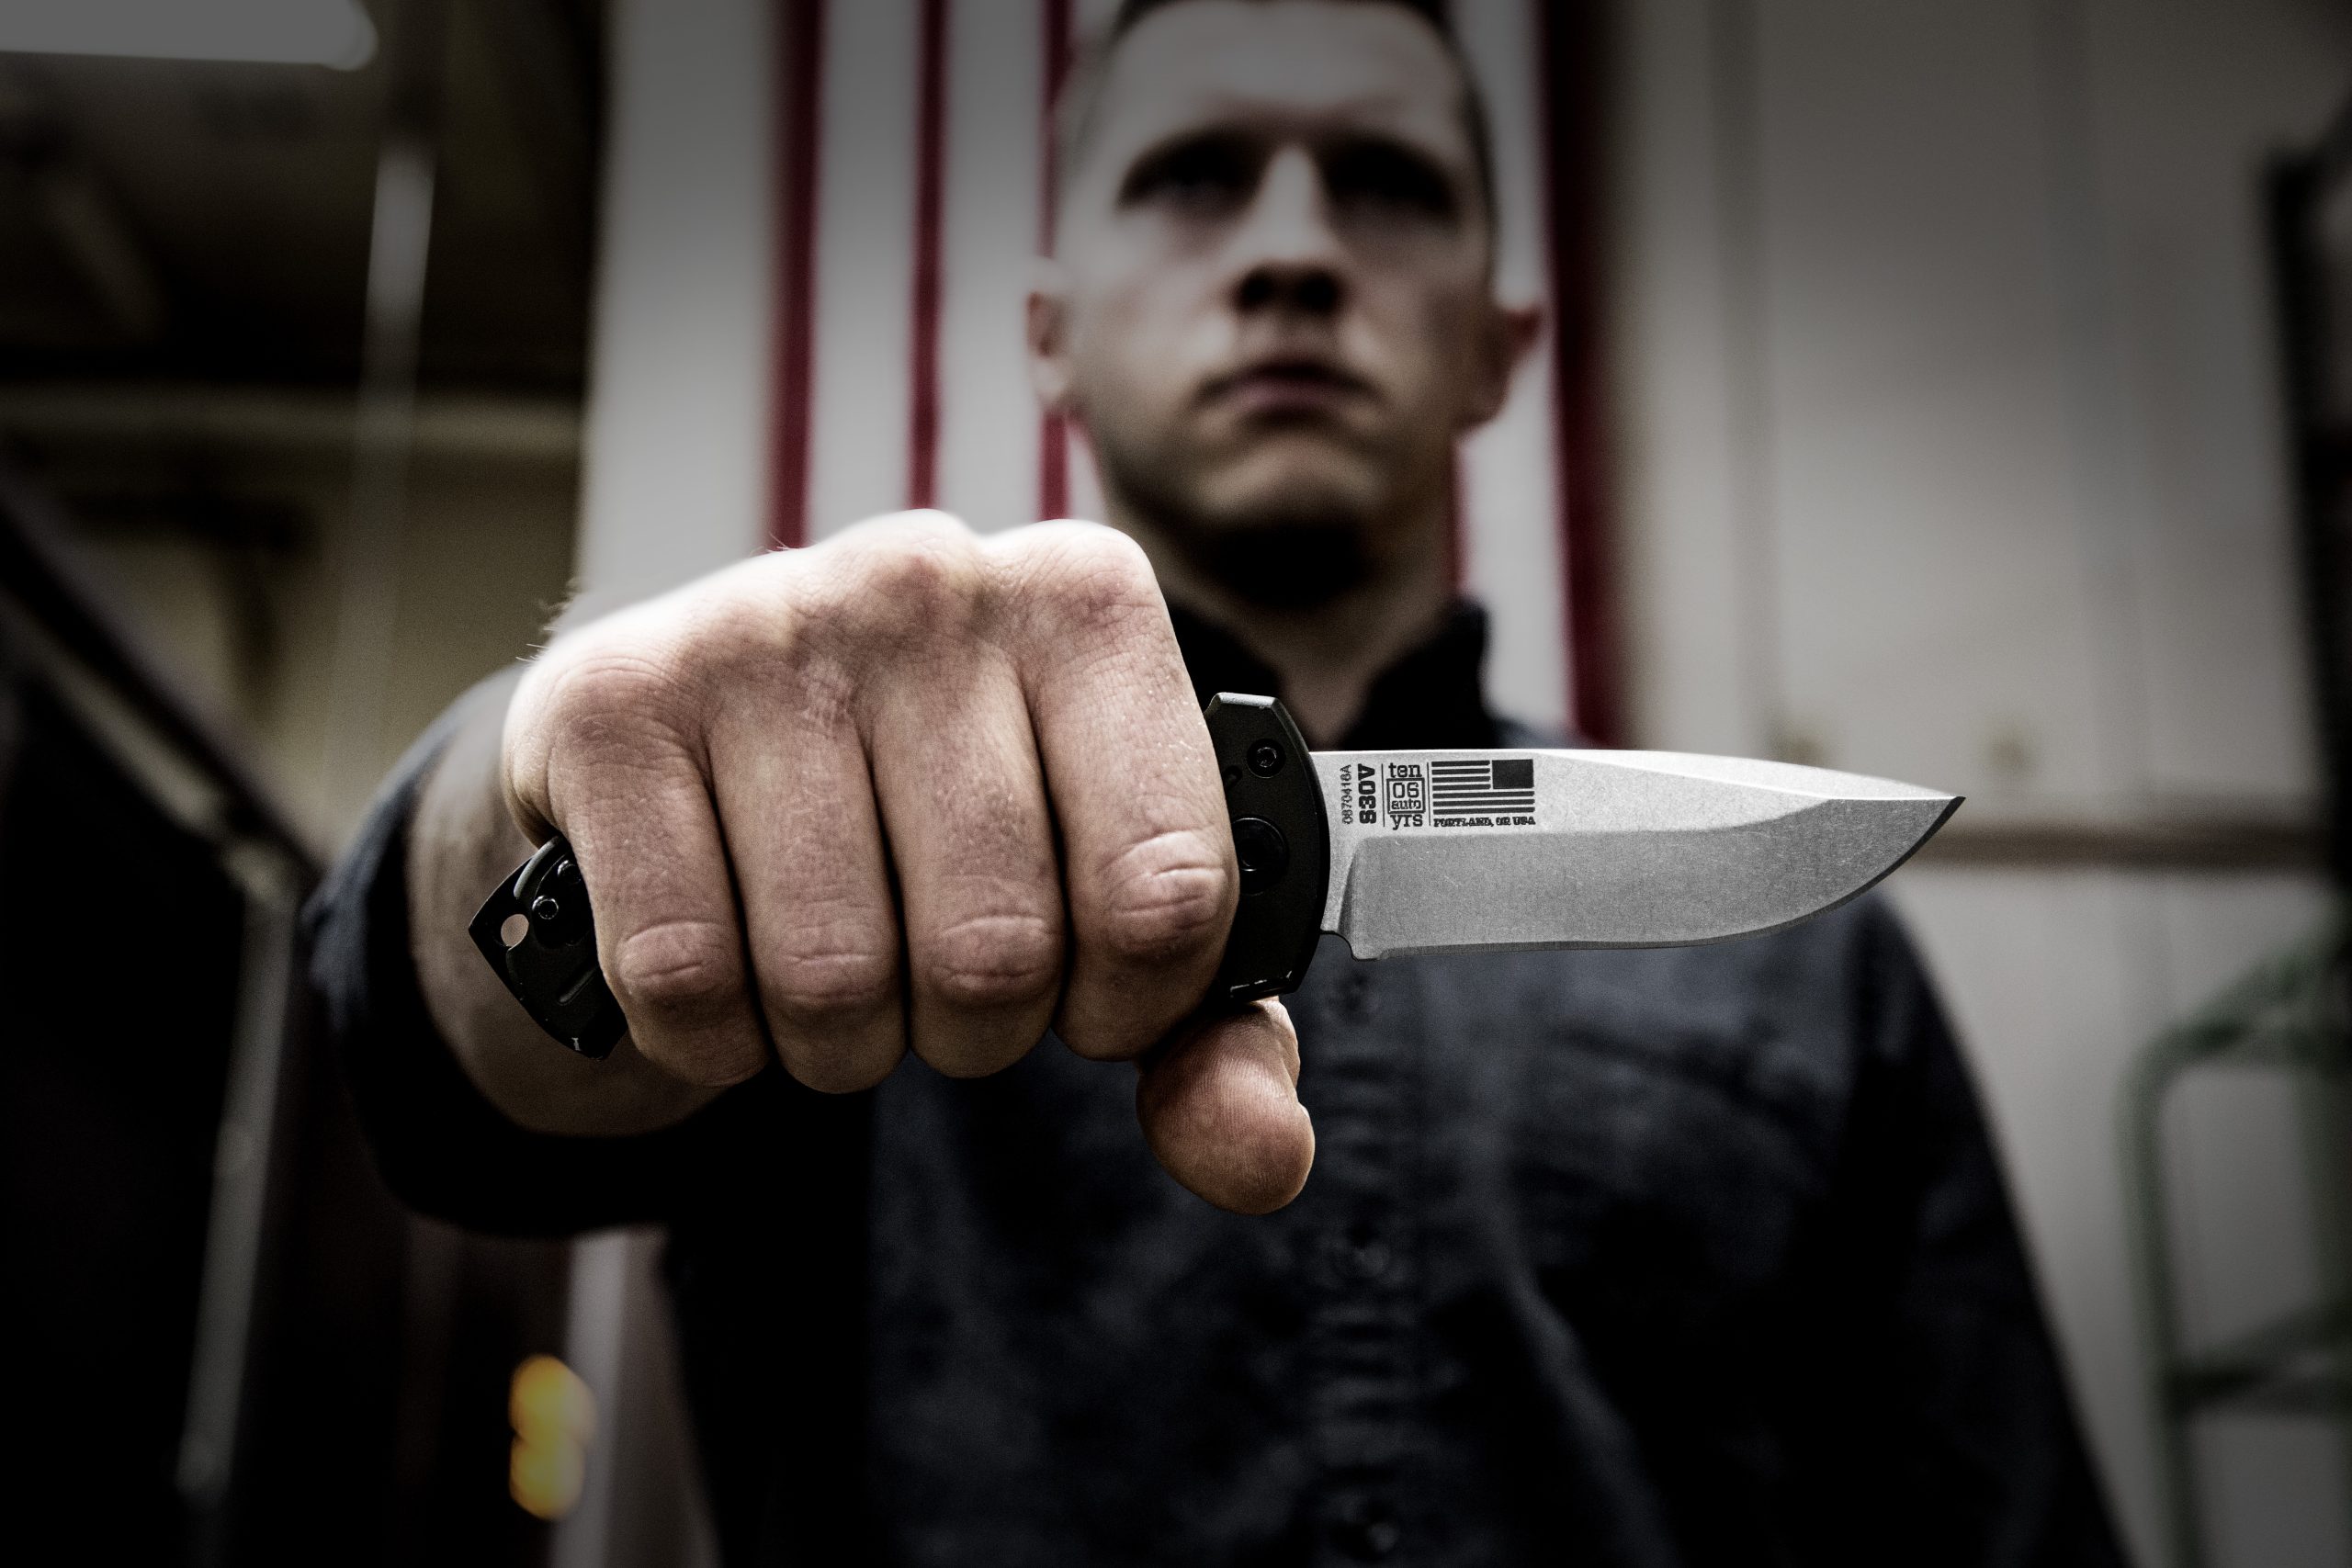 The Gerber 06 Auto: The Most Prolific Automatic Knife Ever